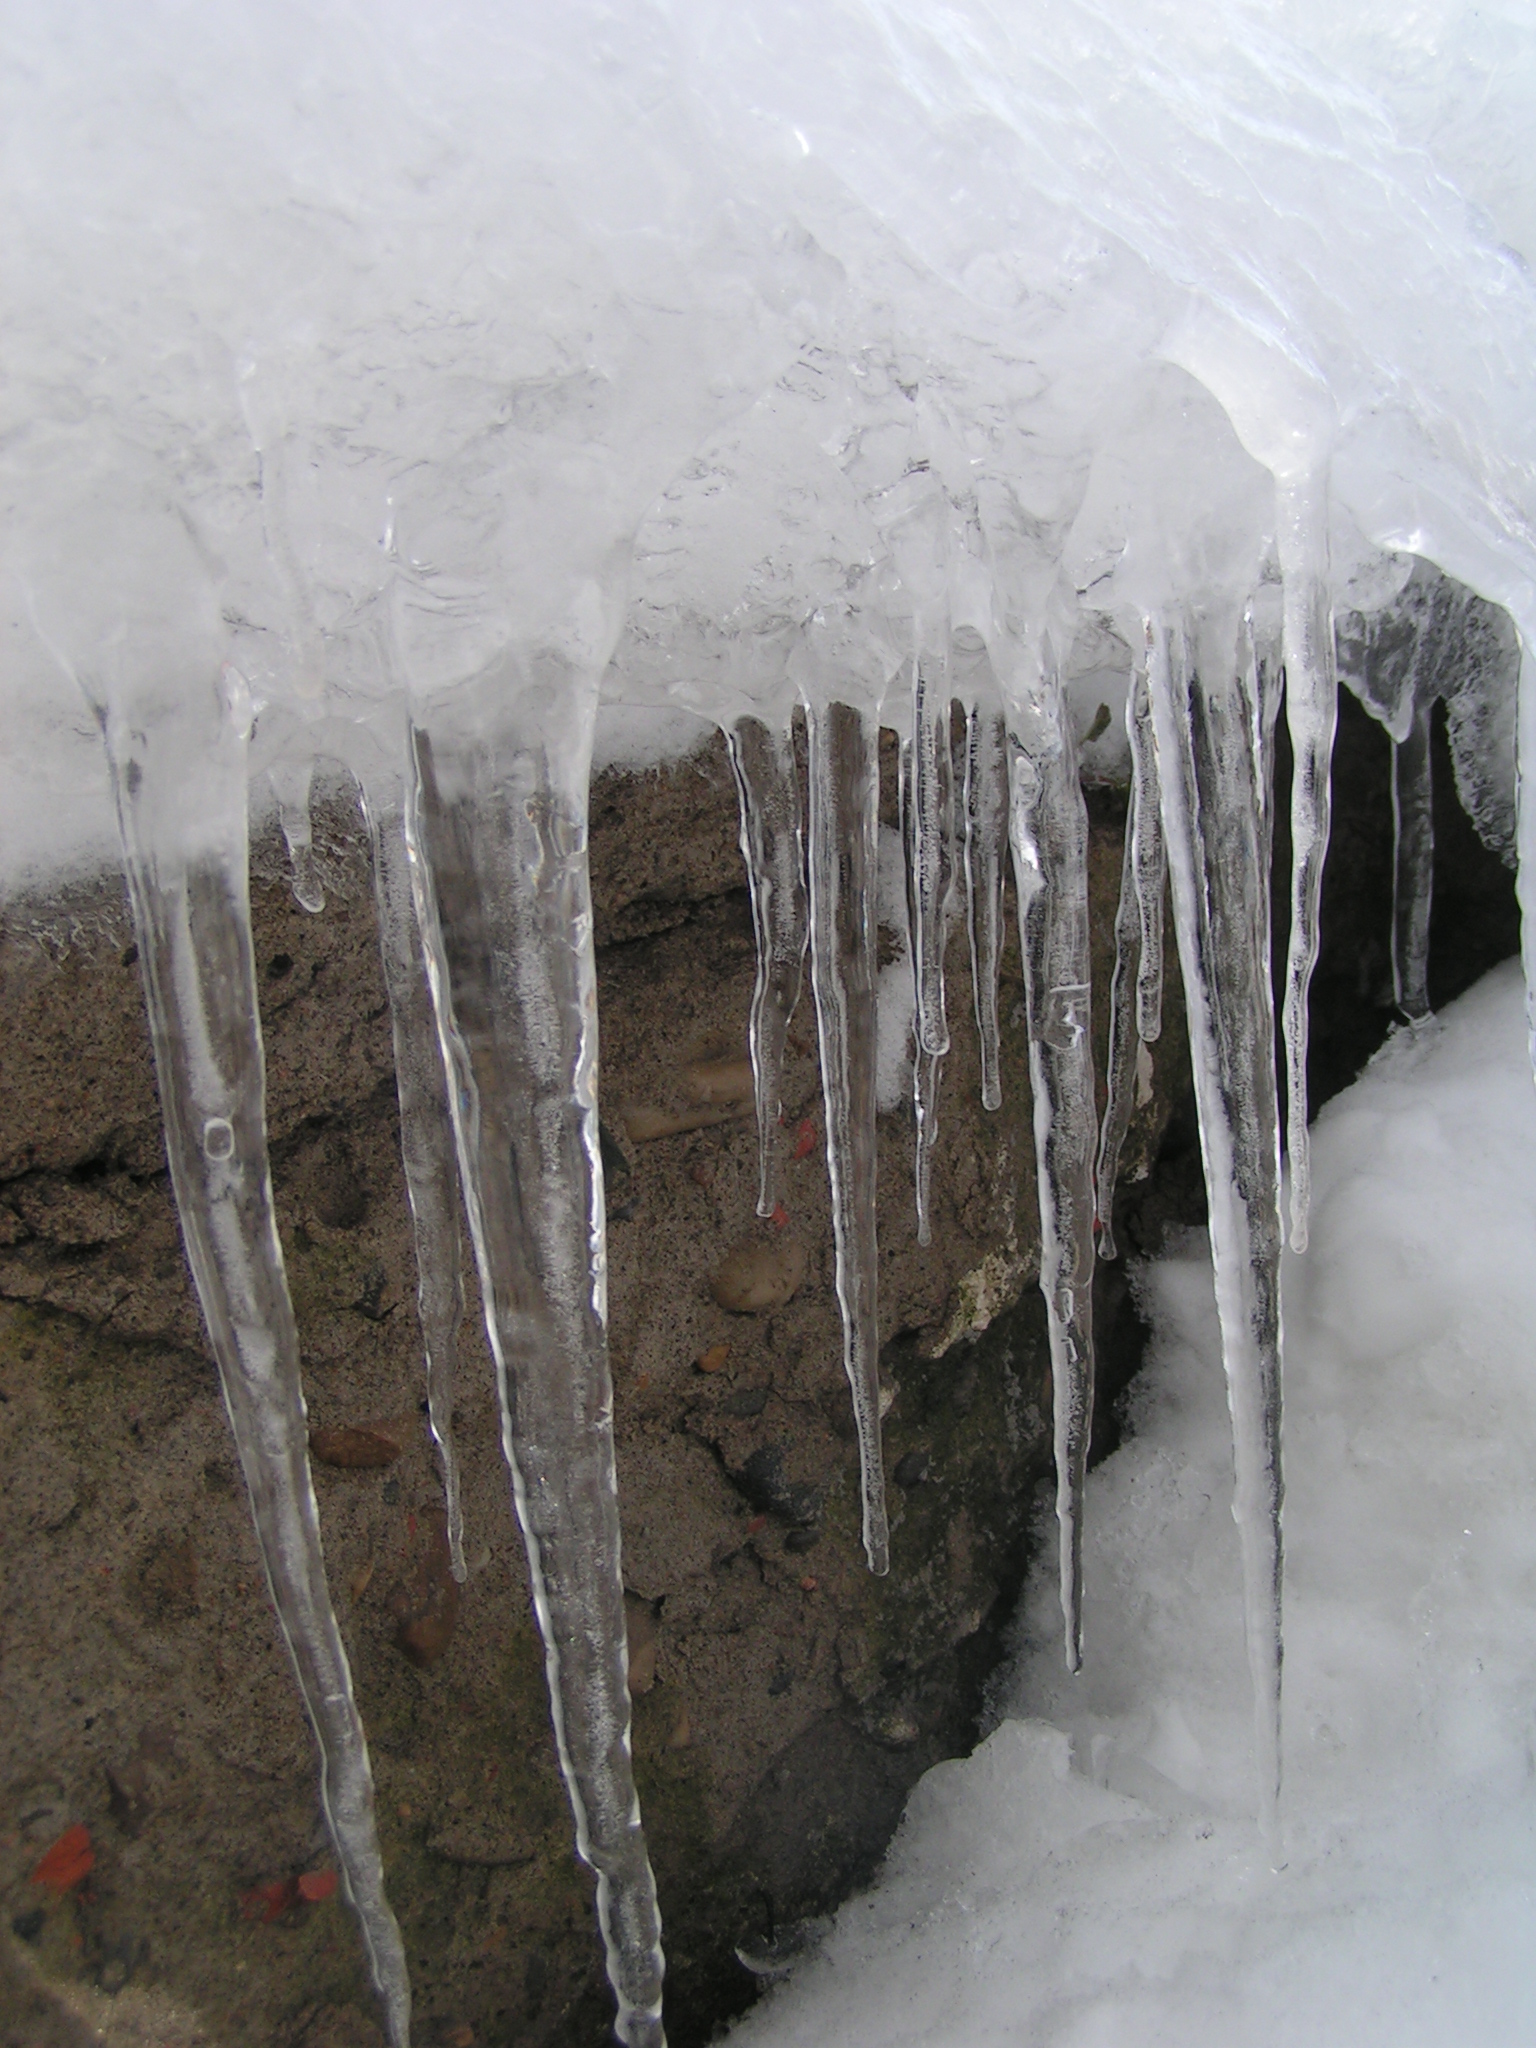 File:Icicles (2435157984).jpg - Wikimedia Commons